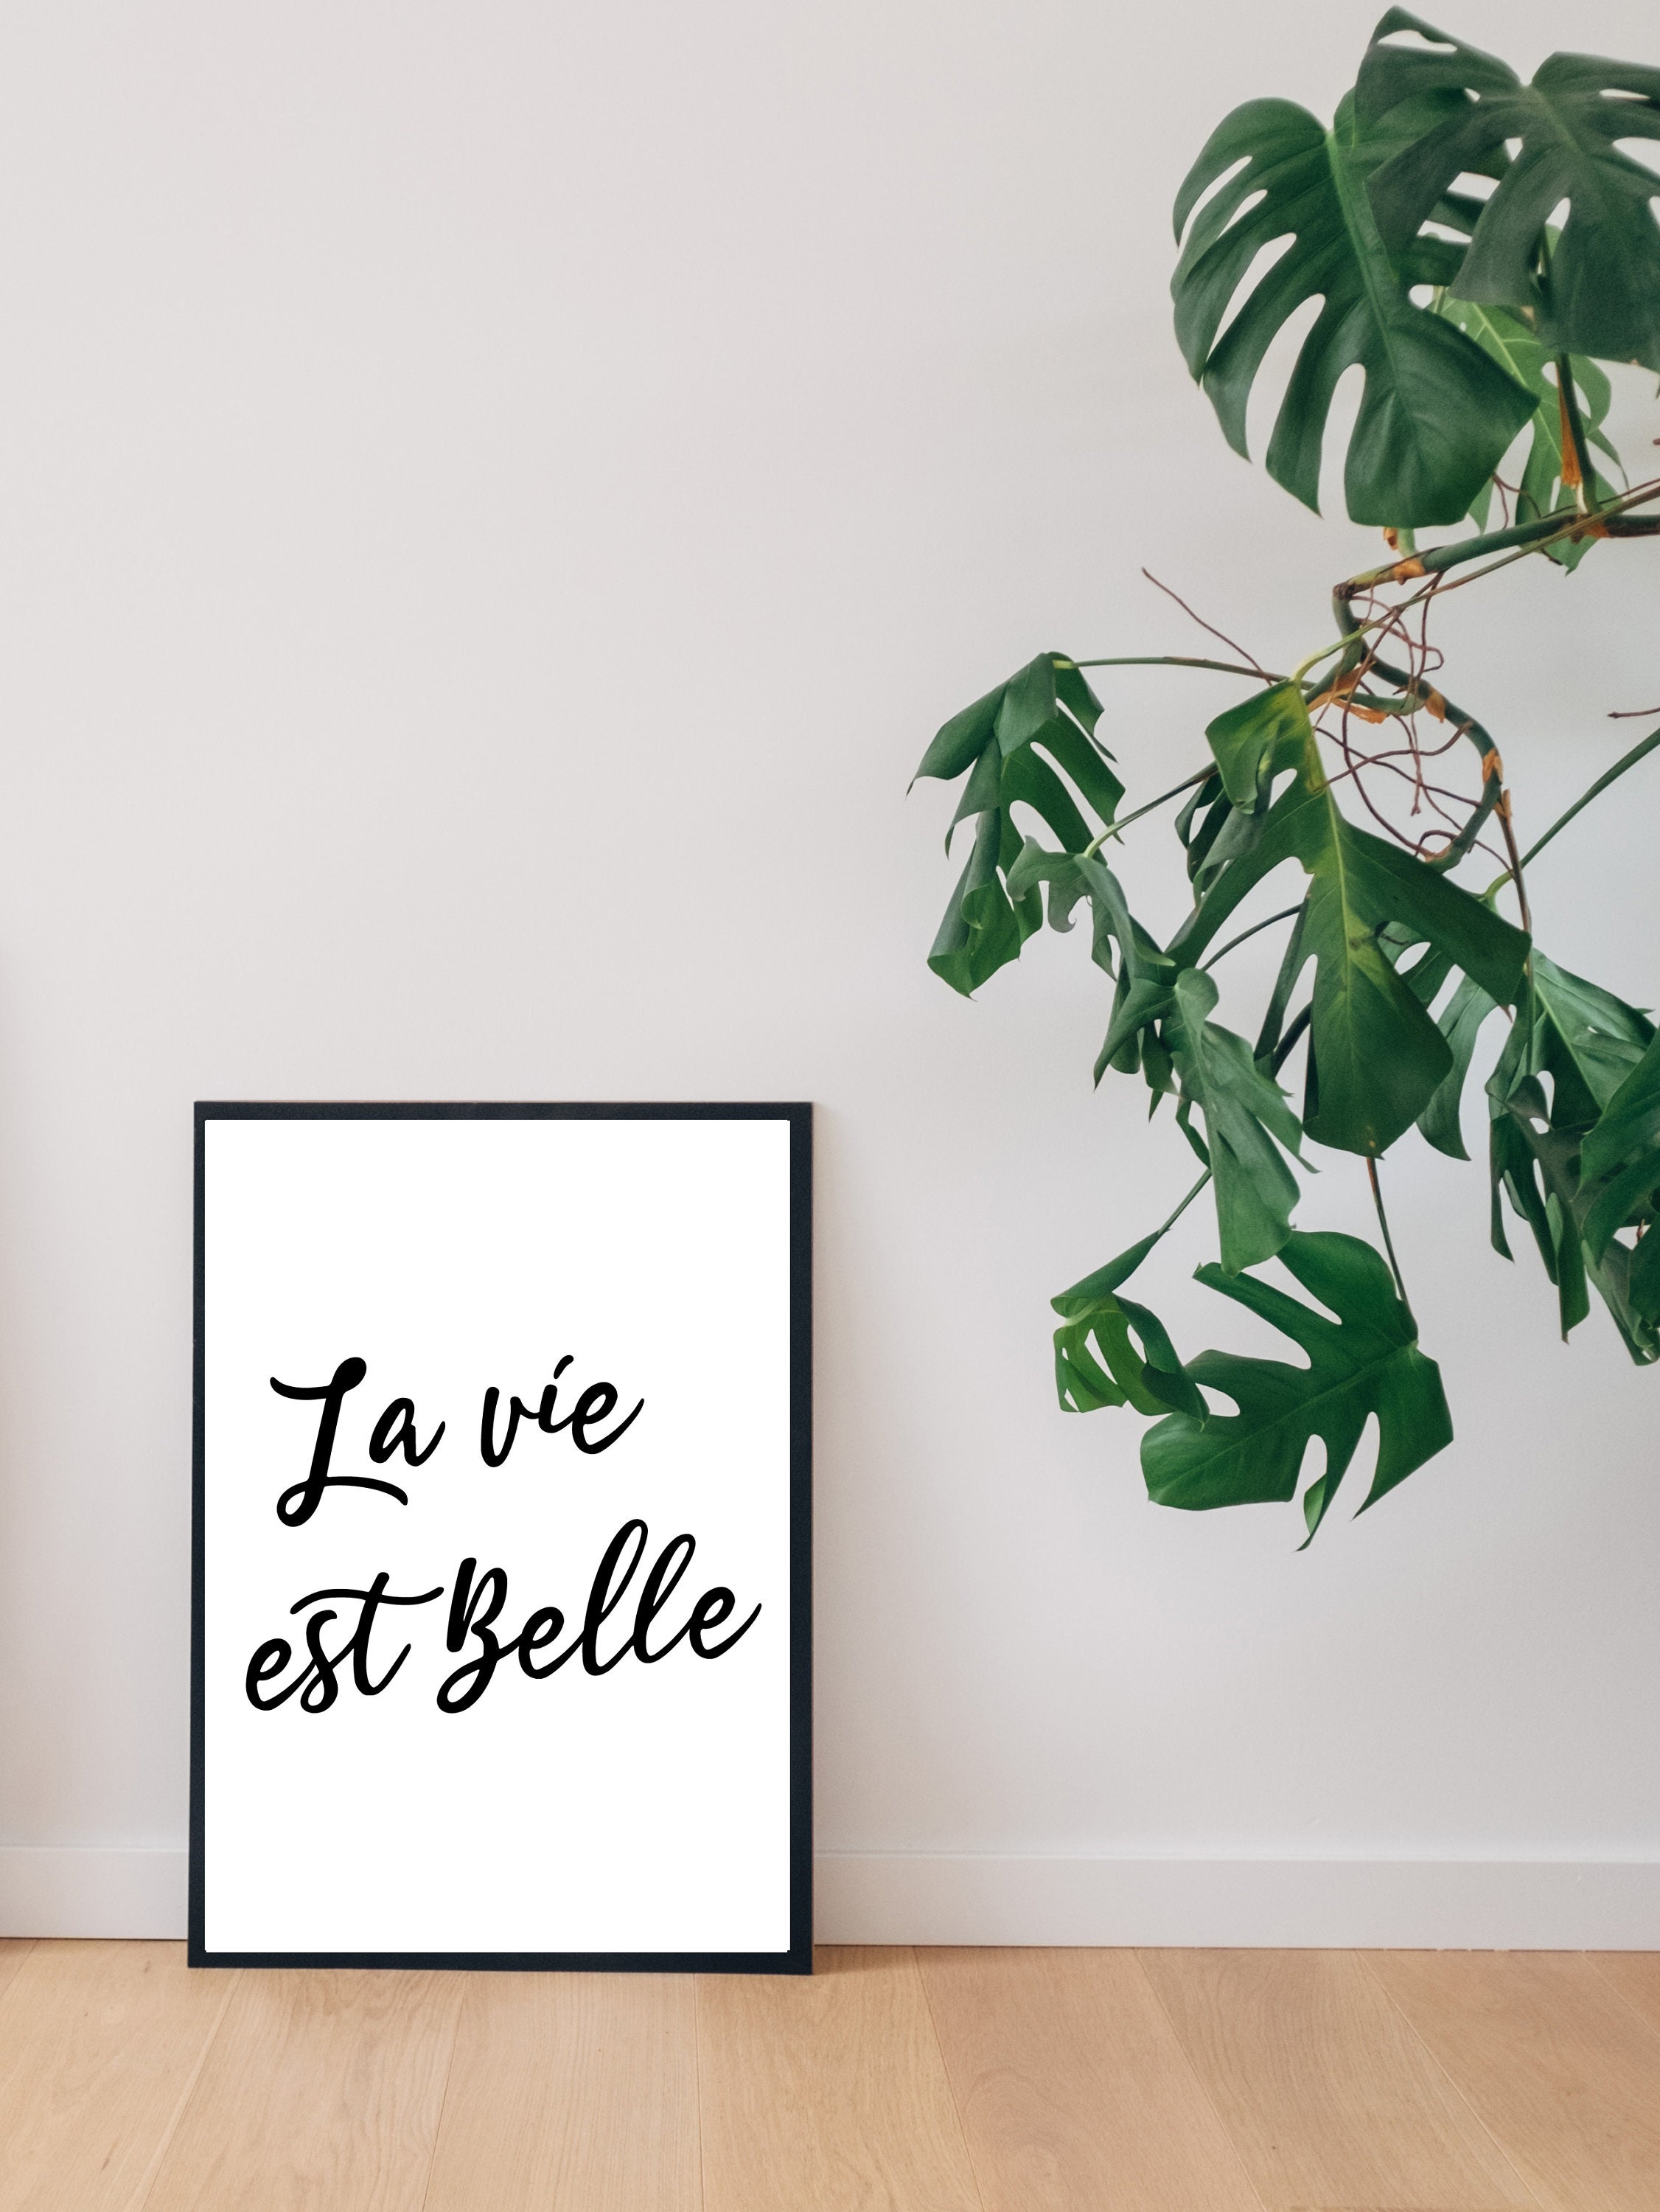 Belle Words Art Download, Poster, Est Bedroom Decor, Quote Living Quote, La Art, Inspirational - Wall French Minimal Print, Room Quote Vie Etsy